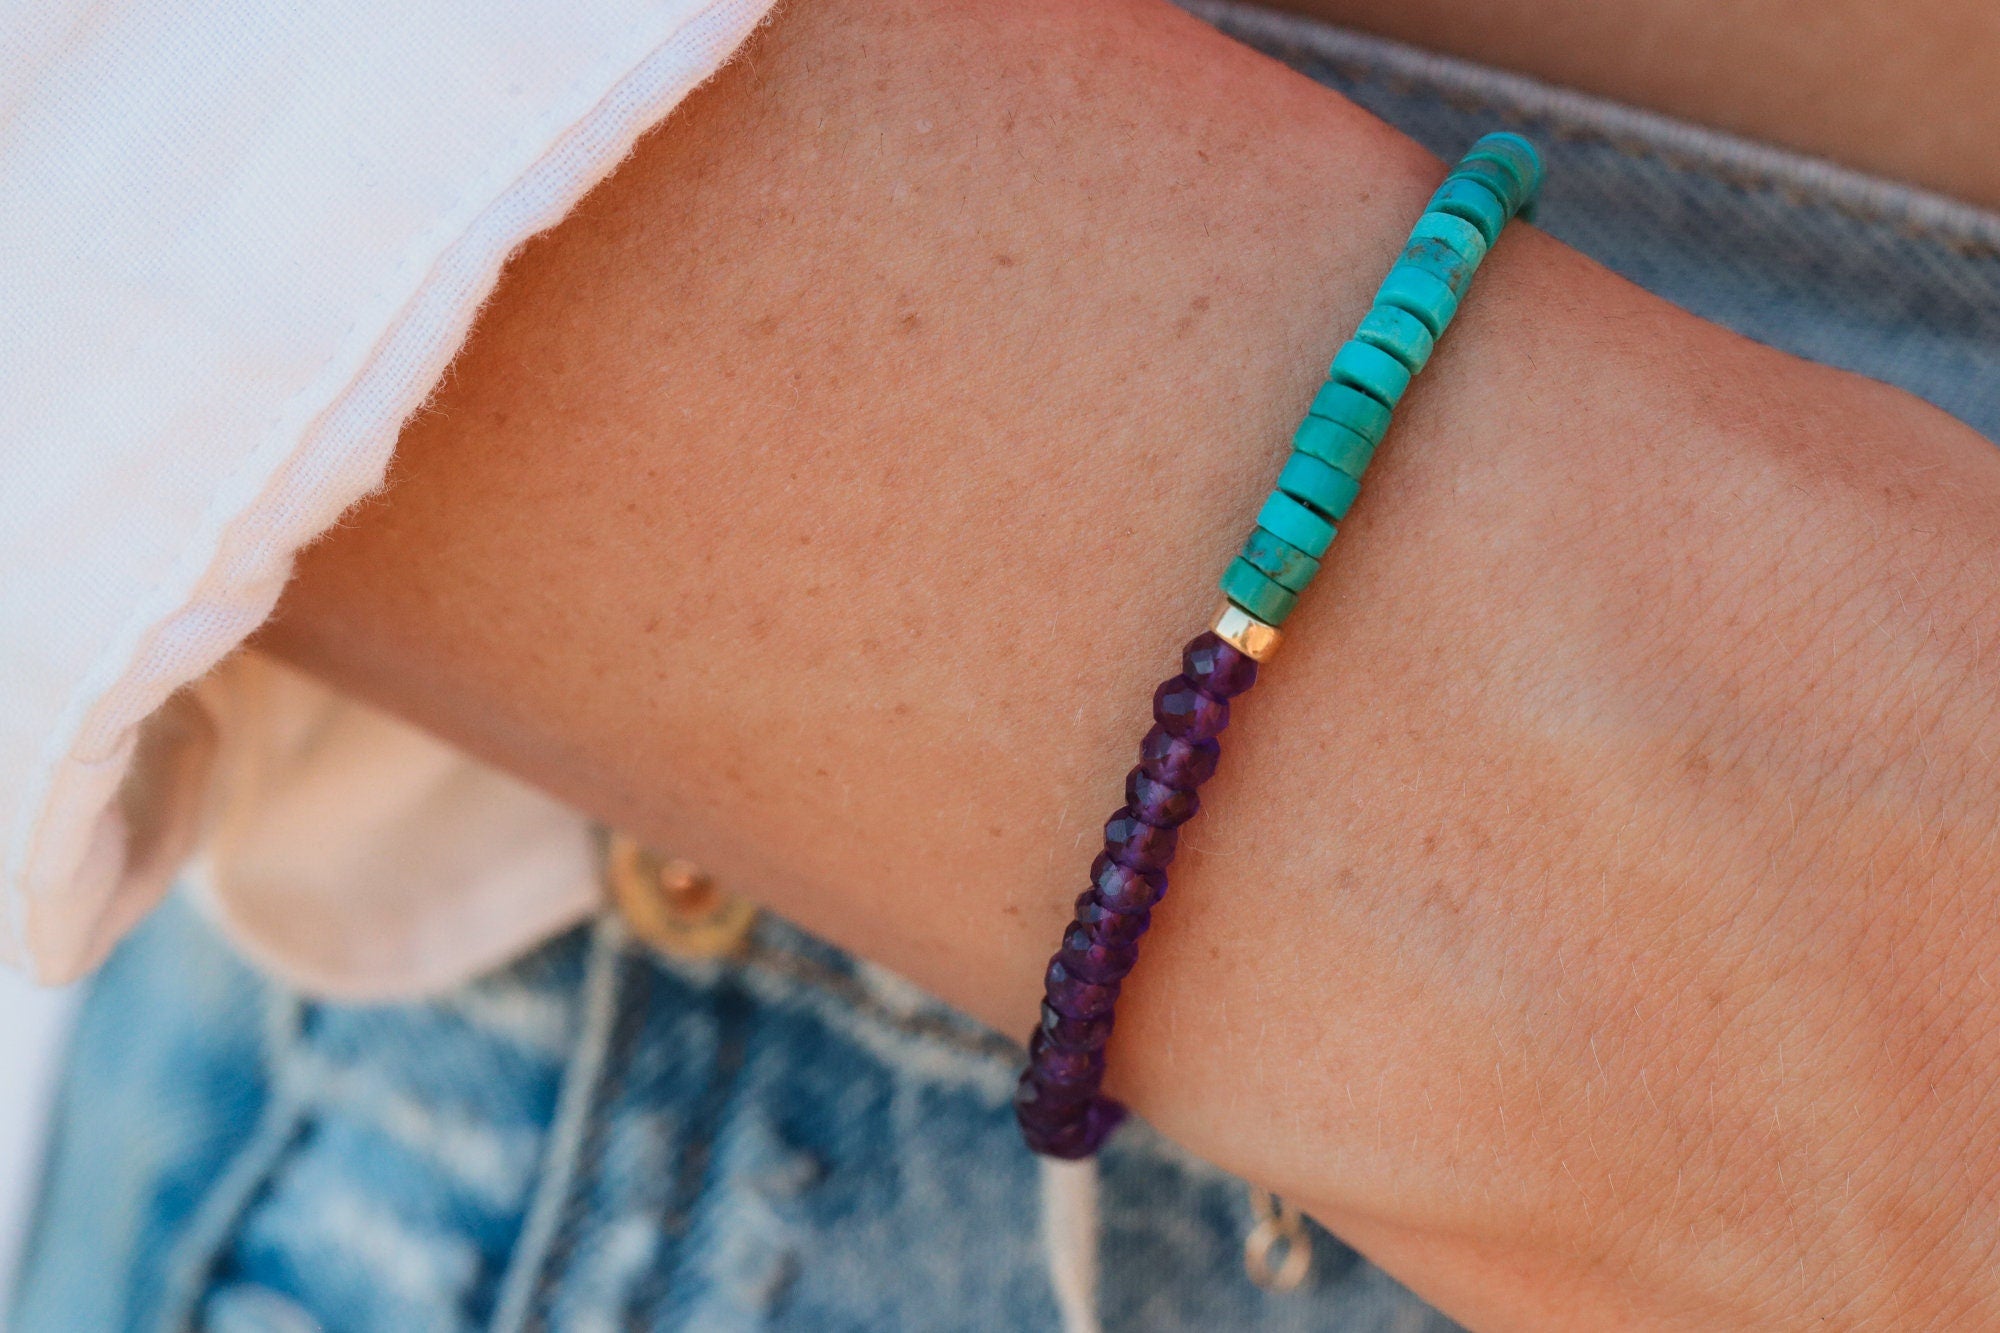 Amethyst and turquoise bracelet